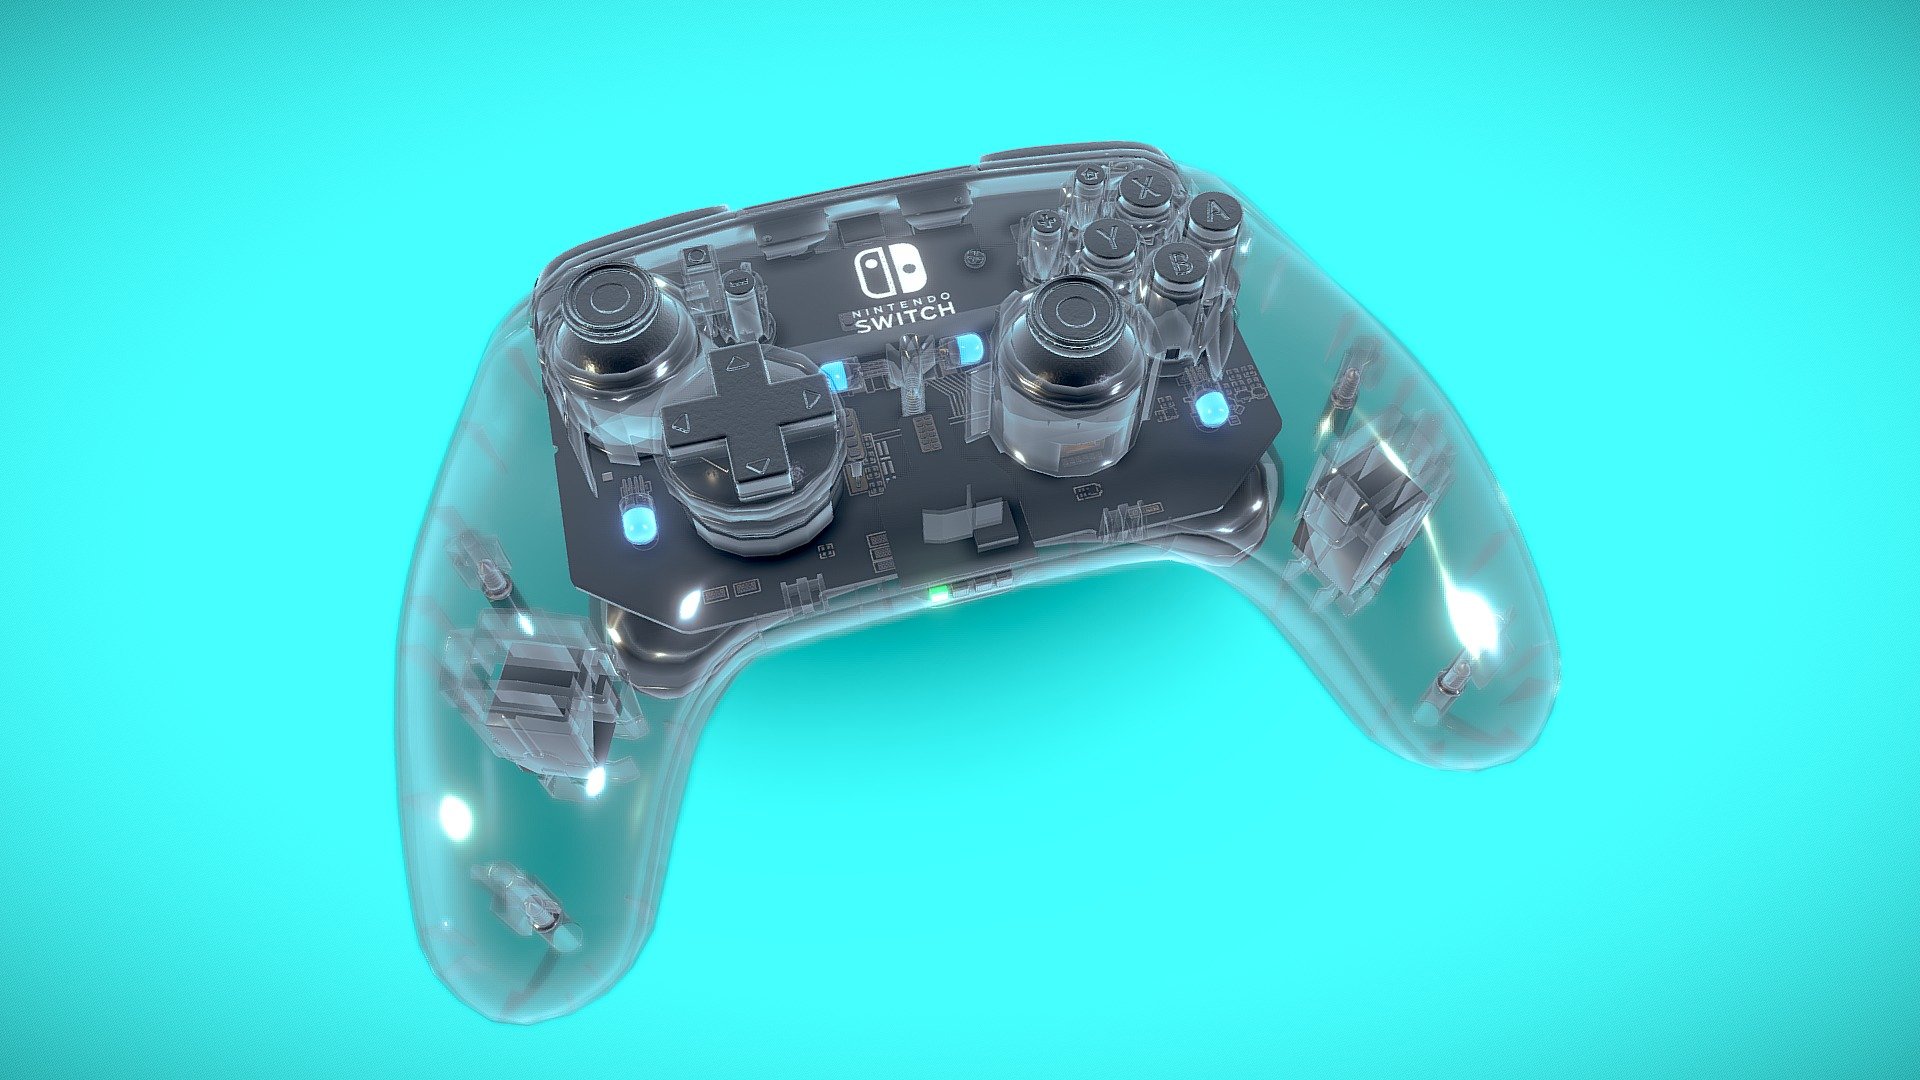 My Blender model of the Transparent Switch Pro Controller. Textured in Substance Painter 3d model